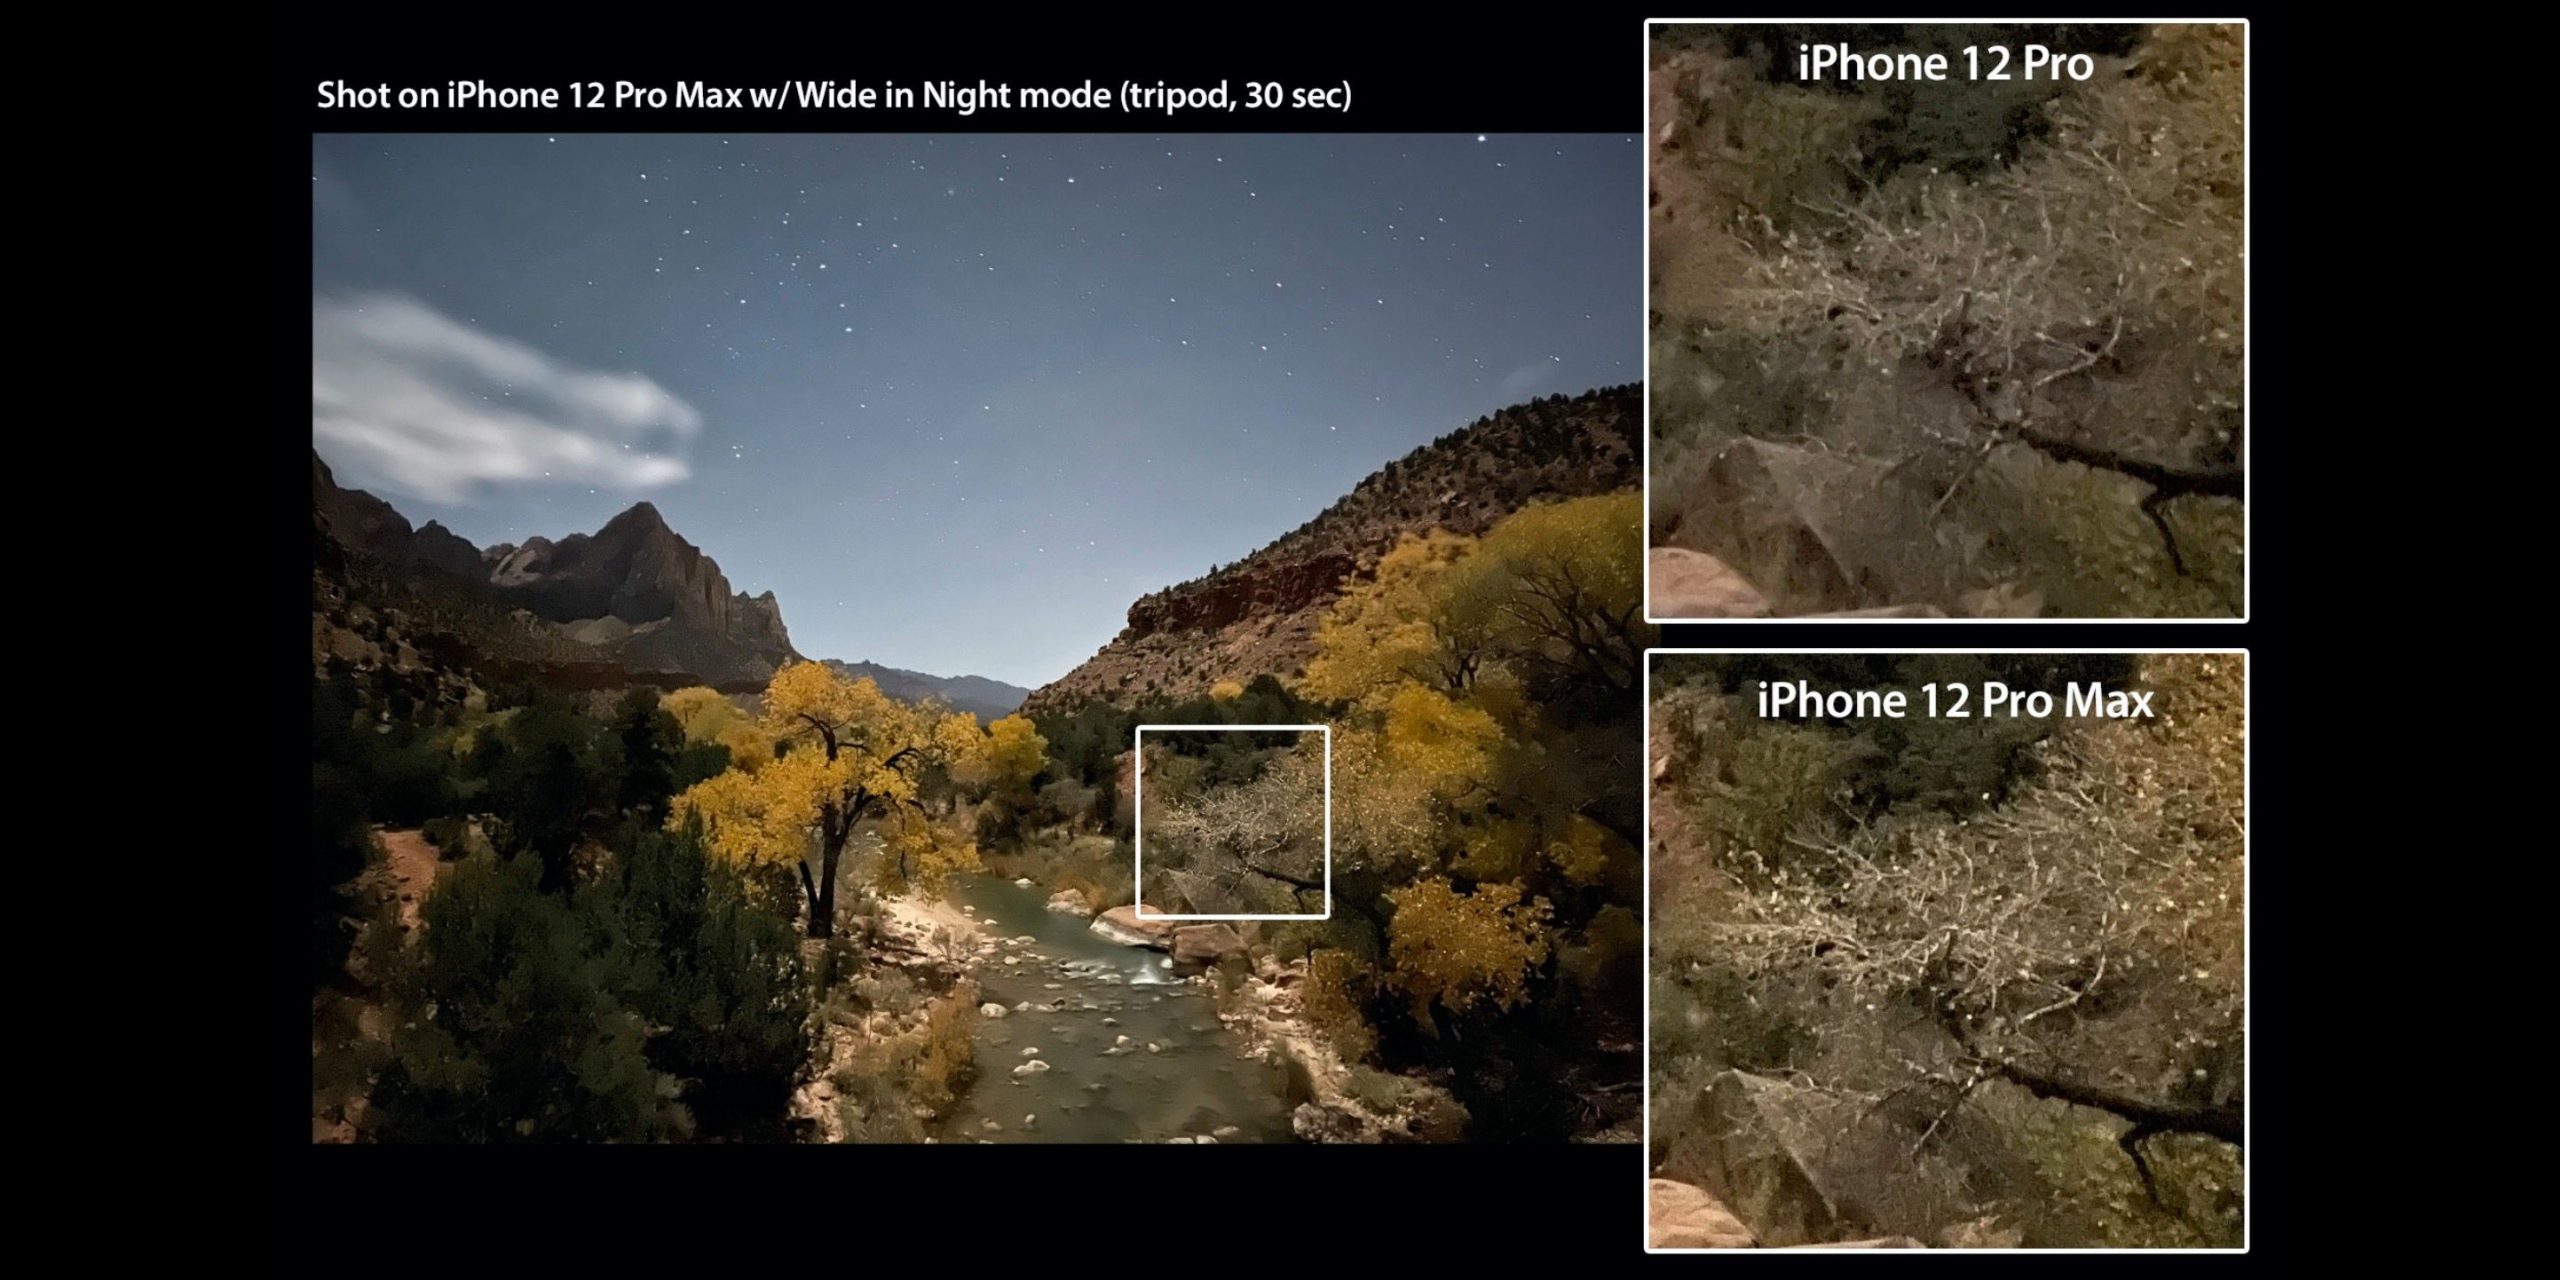 Gallery: Travel Photographer Austin Mann Compares iPhone 12 Pro and iPhone 12 Pro Max Cameras